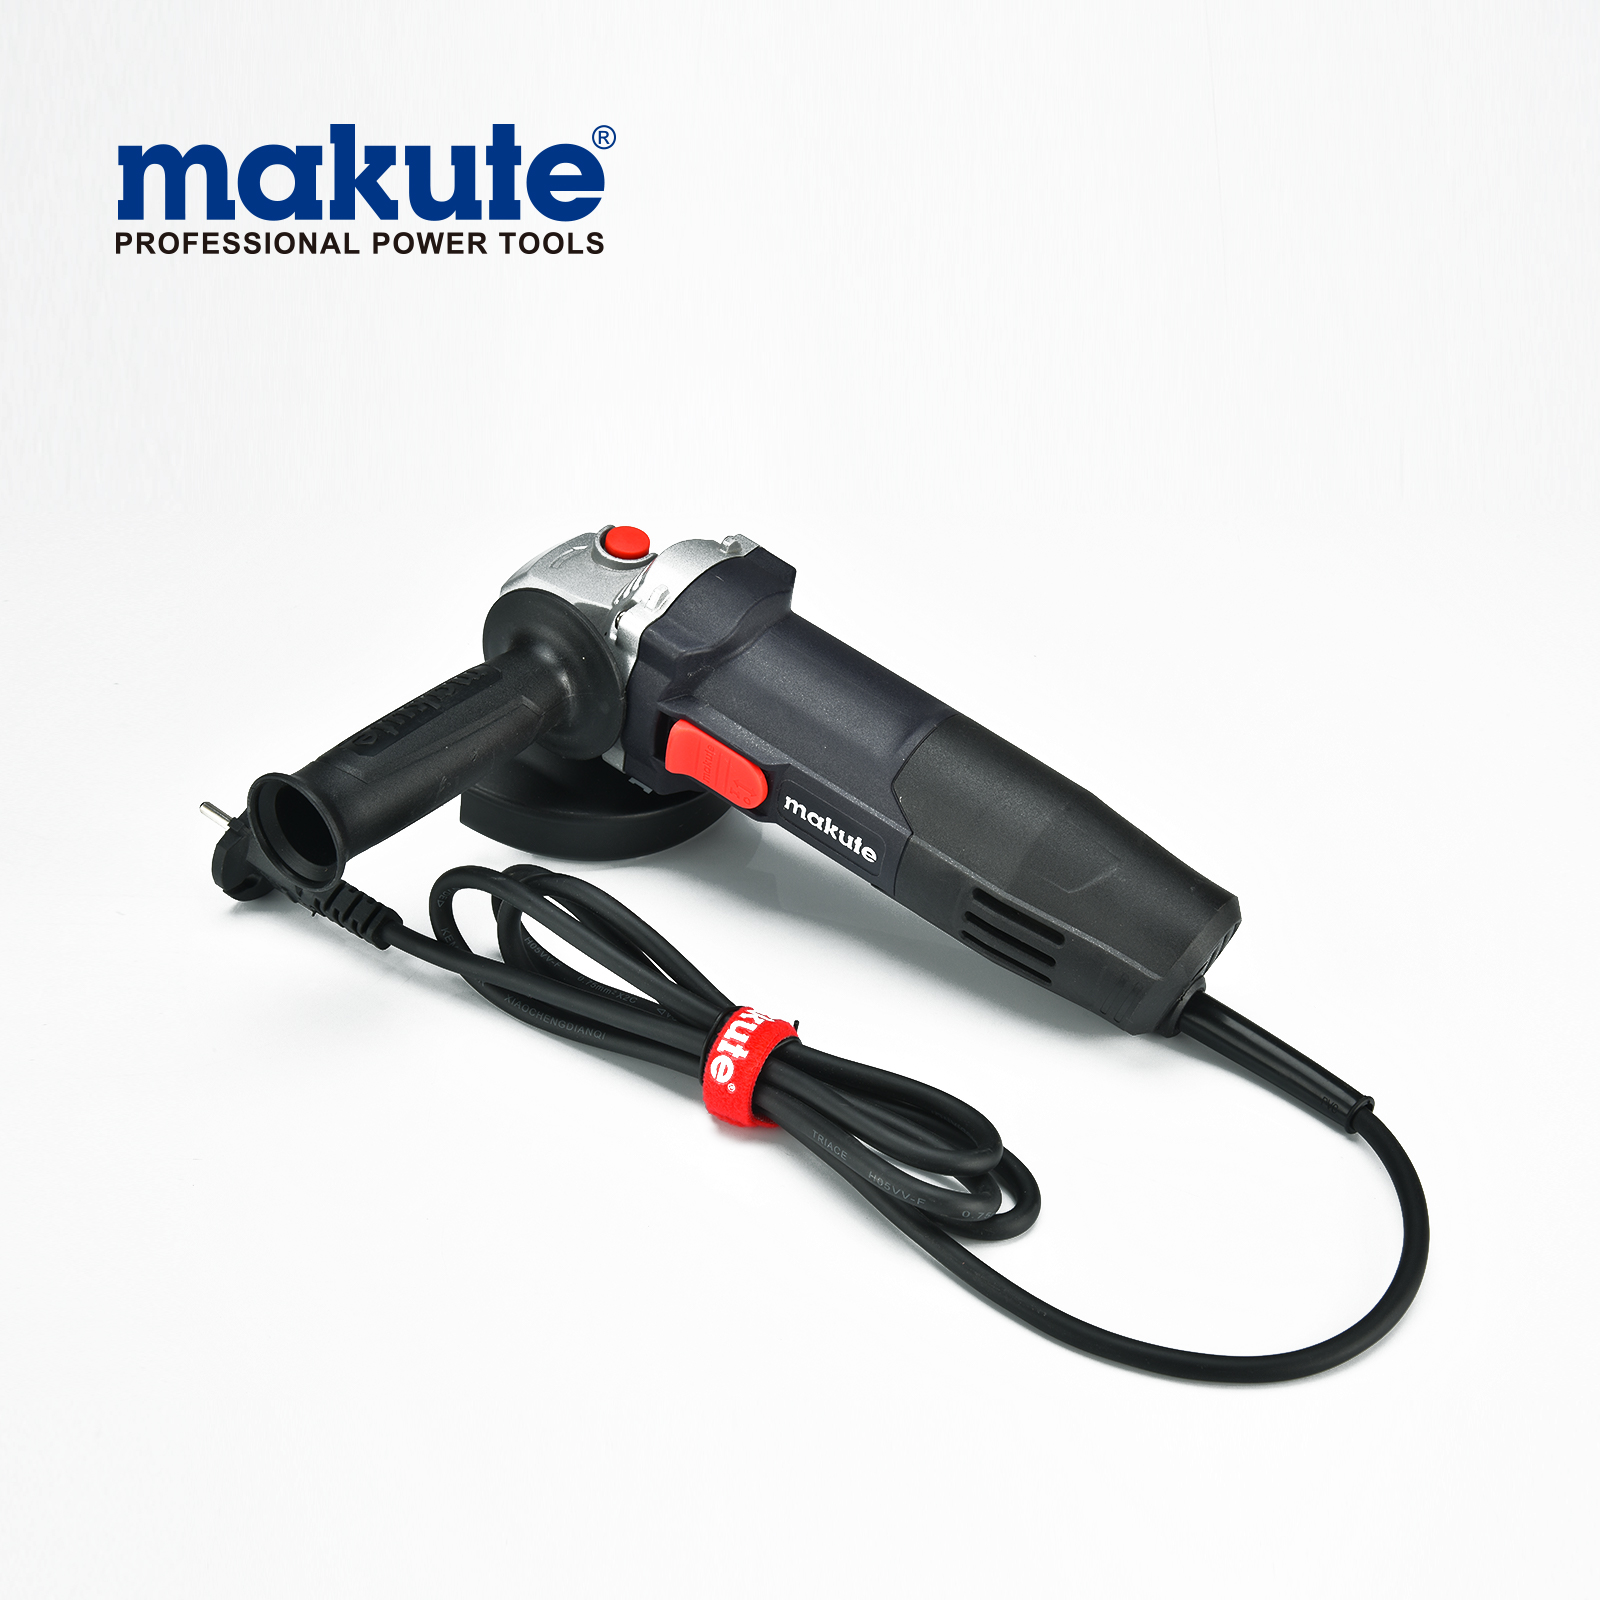  Makute electric 115mm angle grinder